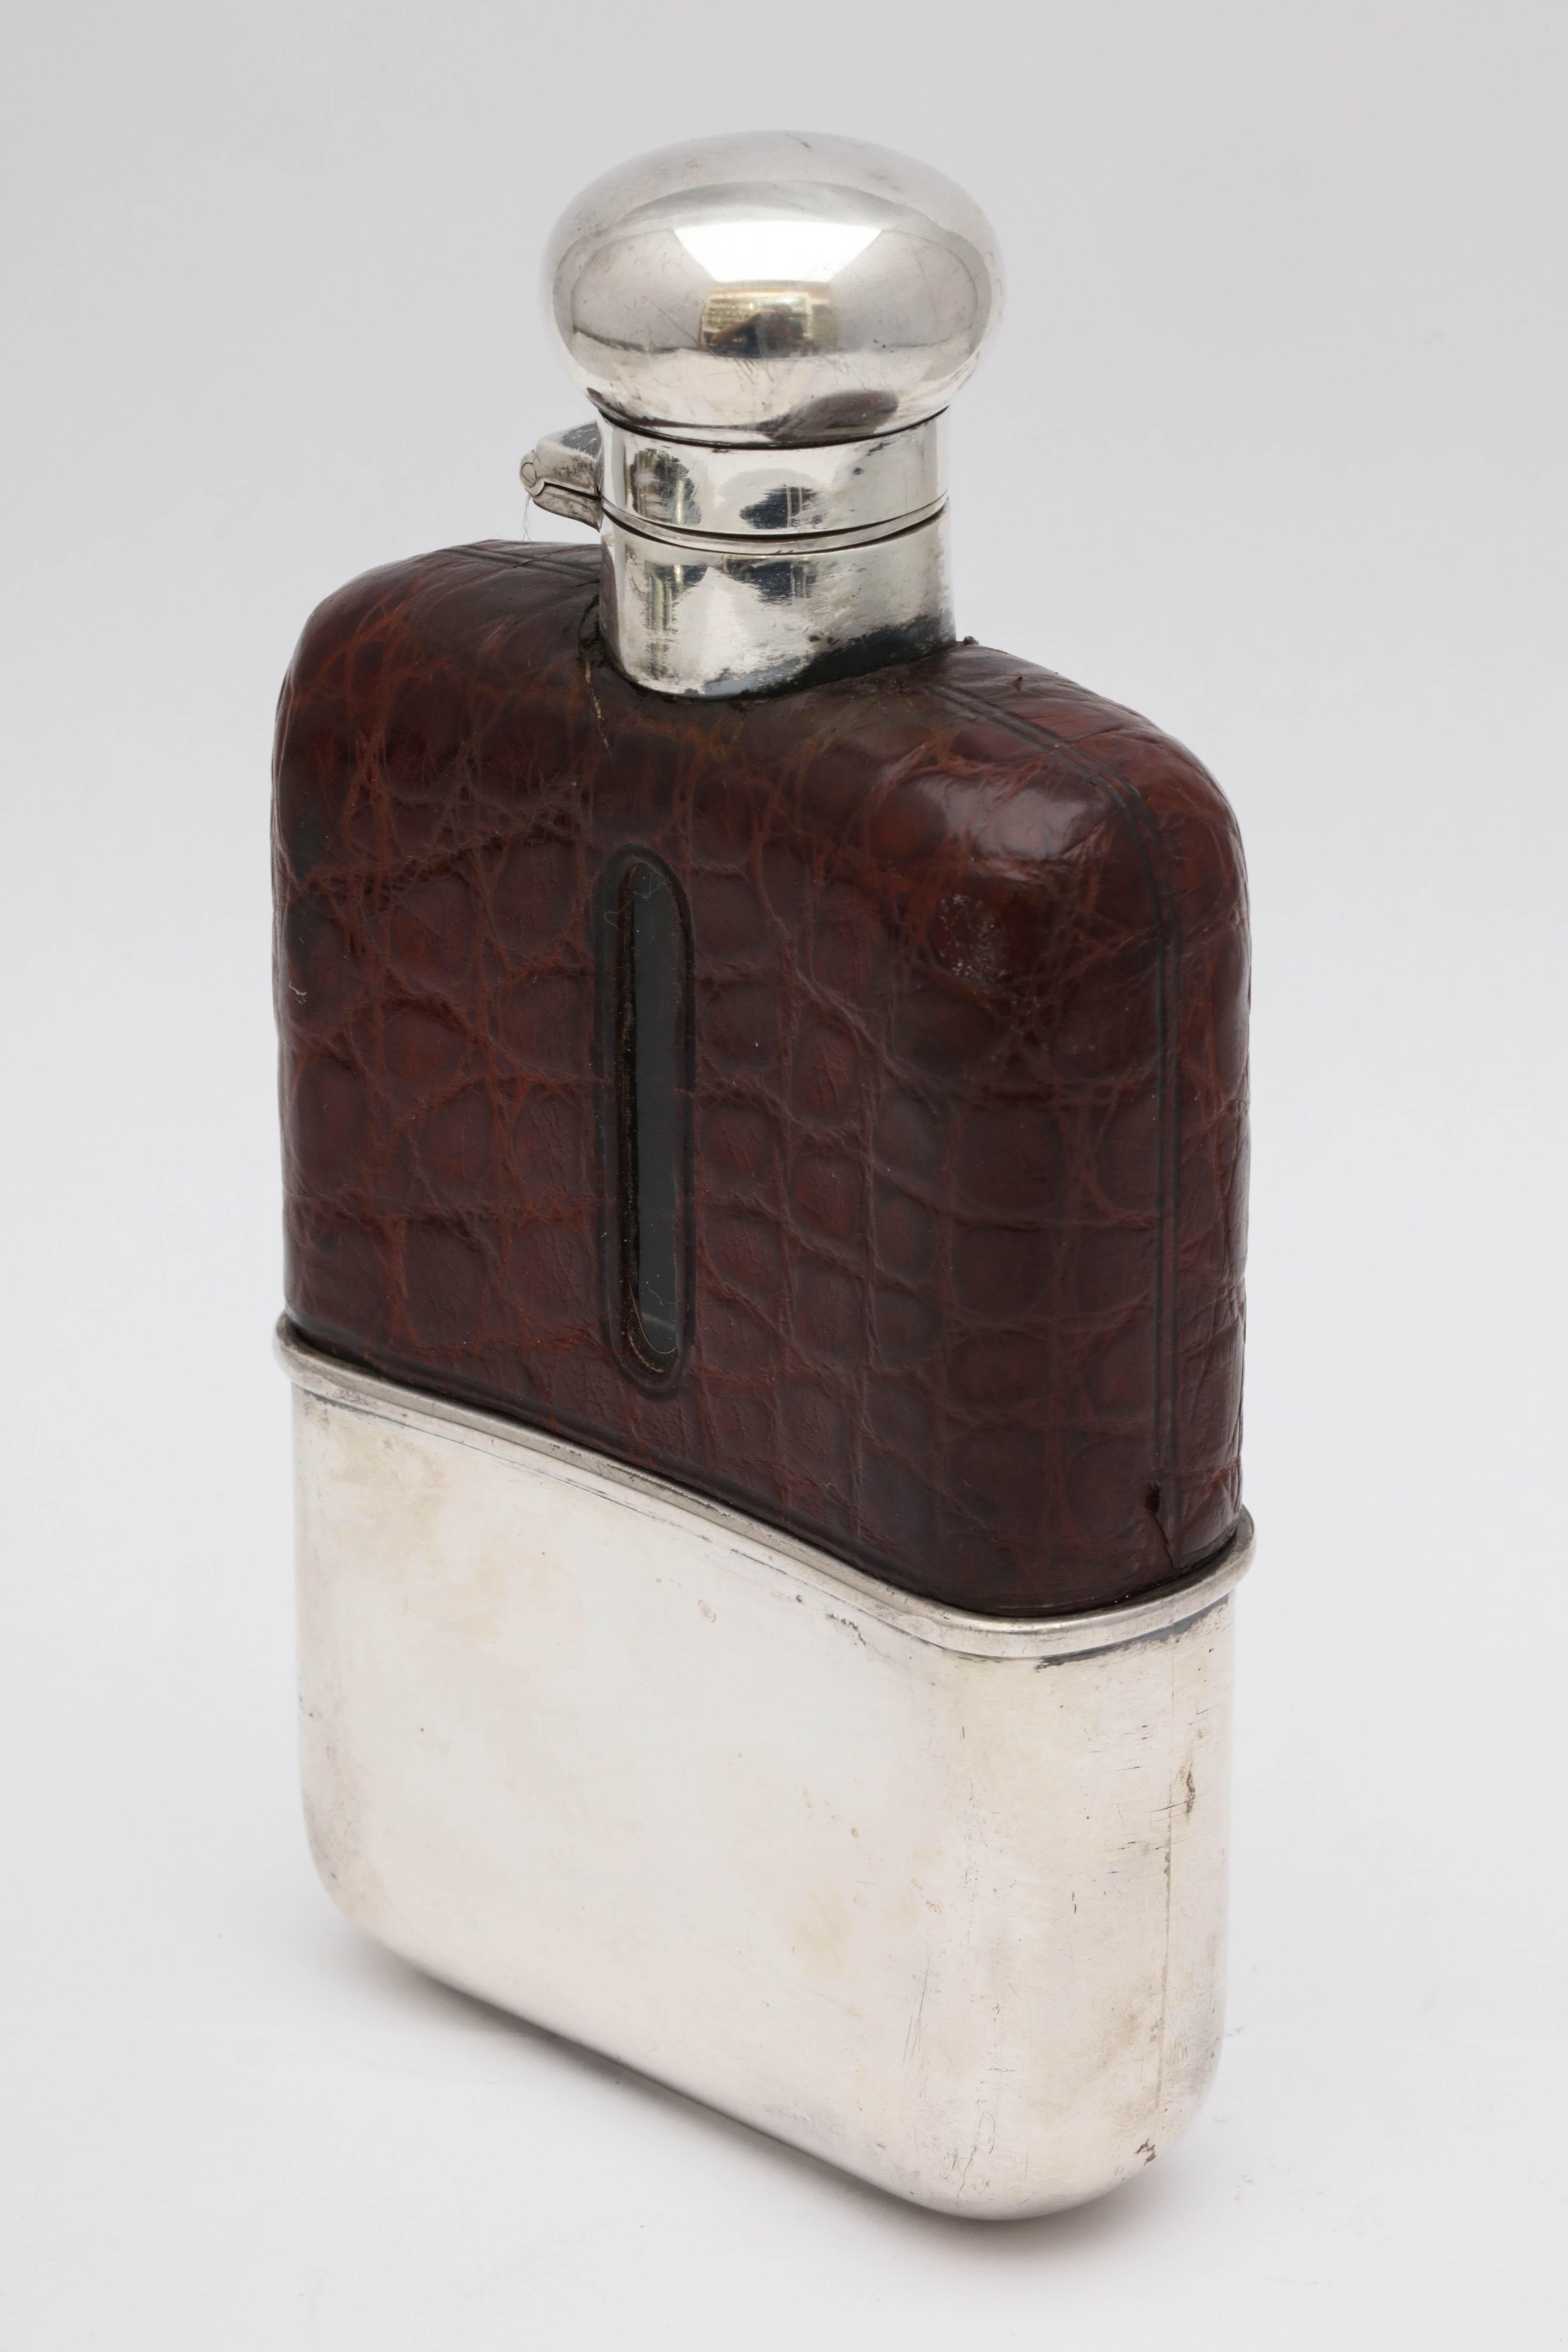 Art Deco, sterling silver and alligator-mounted glass flask with hinged lid and removable sterling silver drinking cup, Chester, England, 1917, Hamilton and Company - makers. Opening in alligator mount allows one to see how much liquid is left in